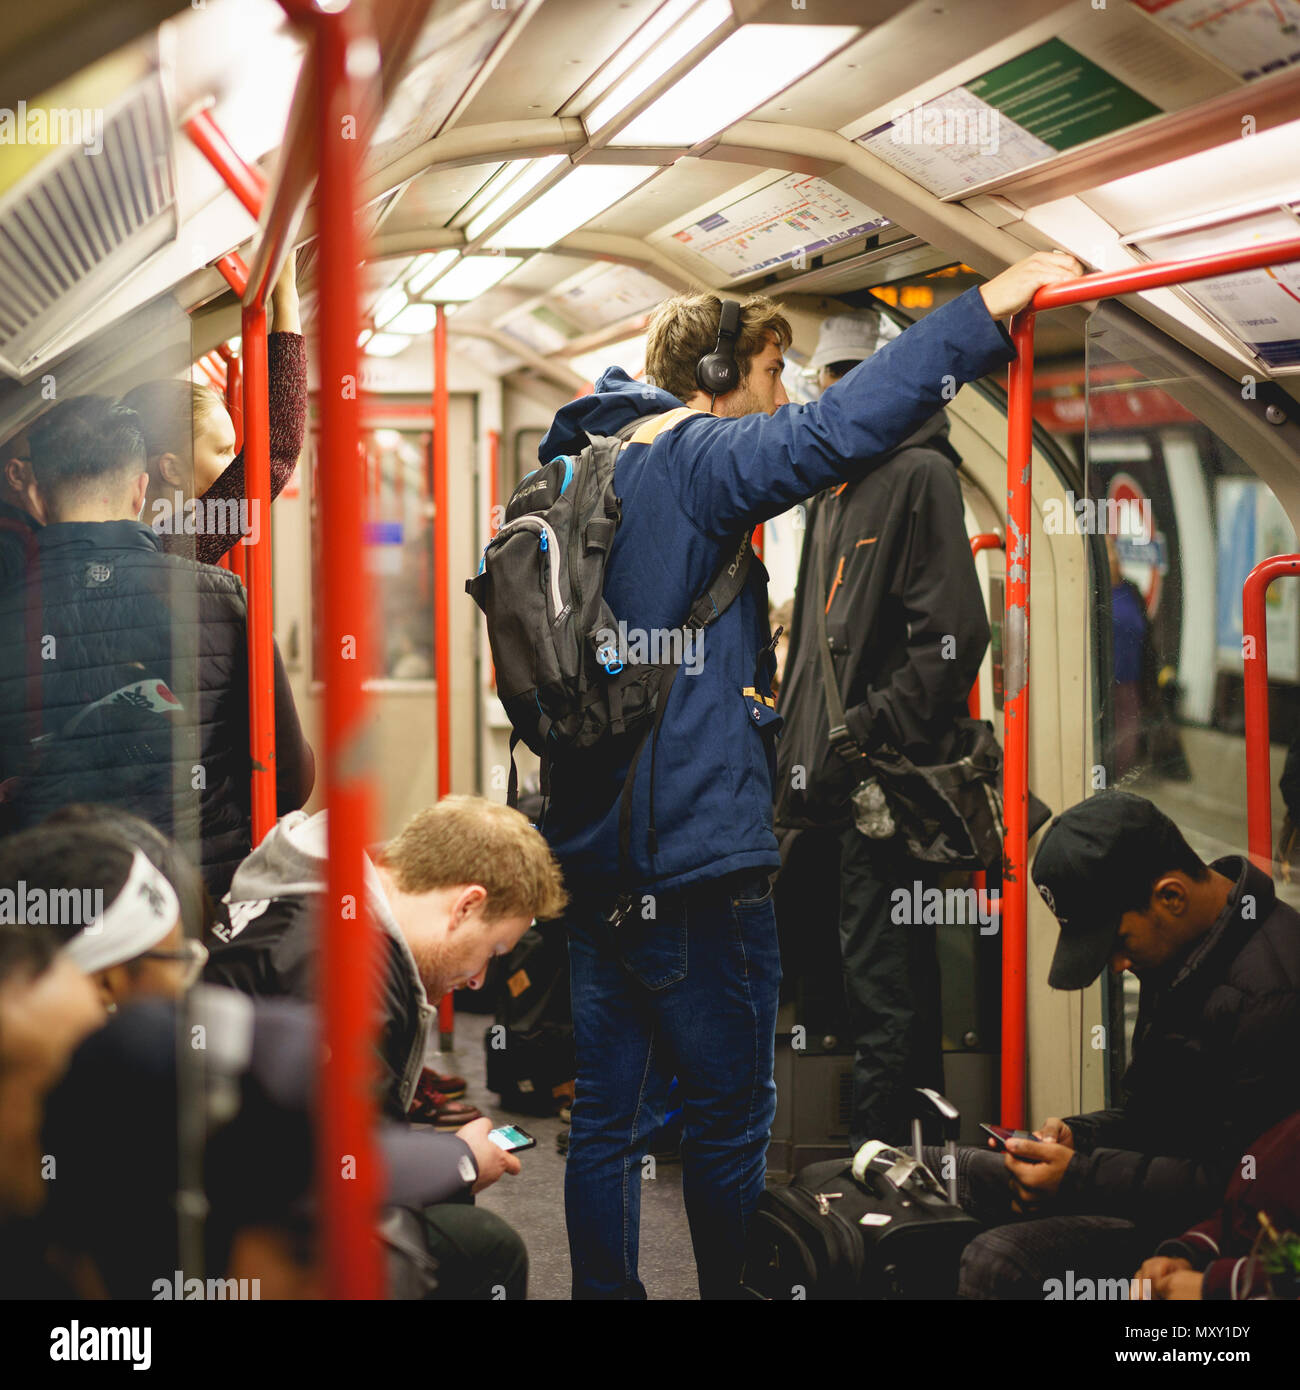 London, UK - October 2017. People commuting on an underground train in London. The Tube handles up to 5 Million passenger per day. Square format. Stock Photo